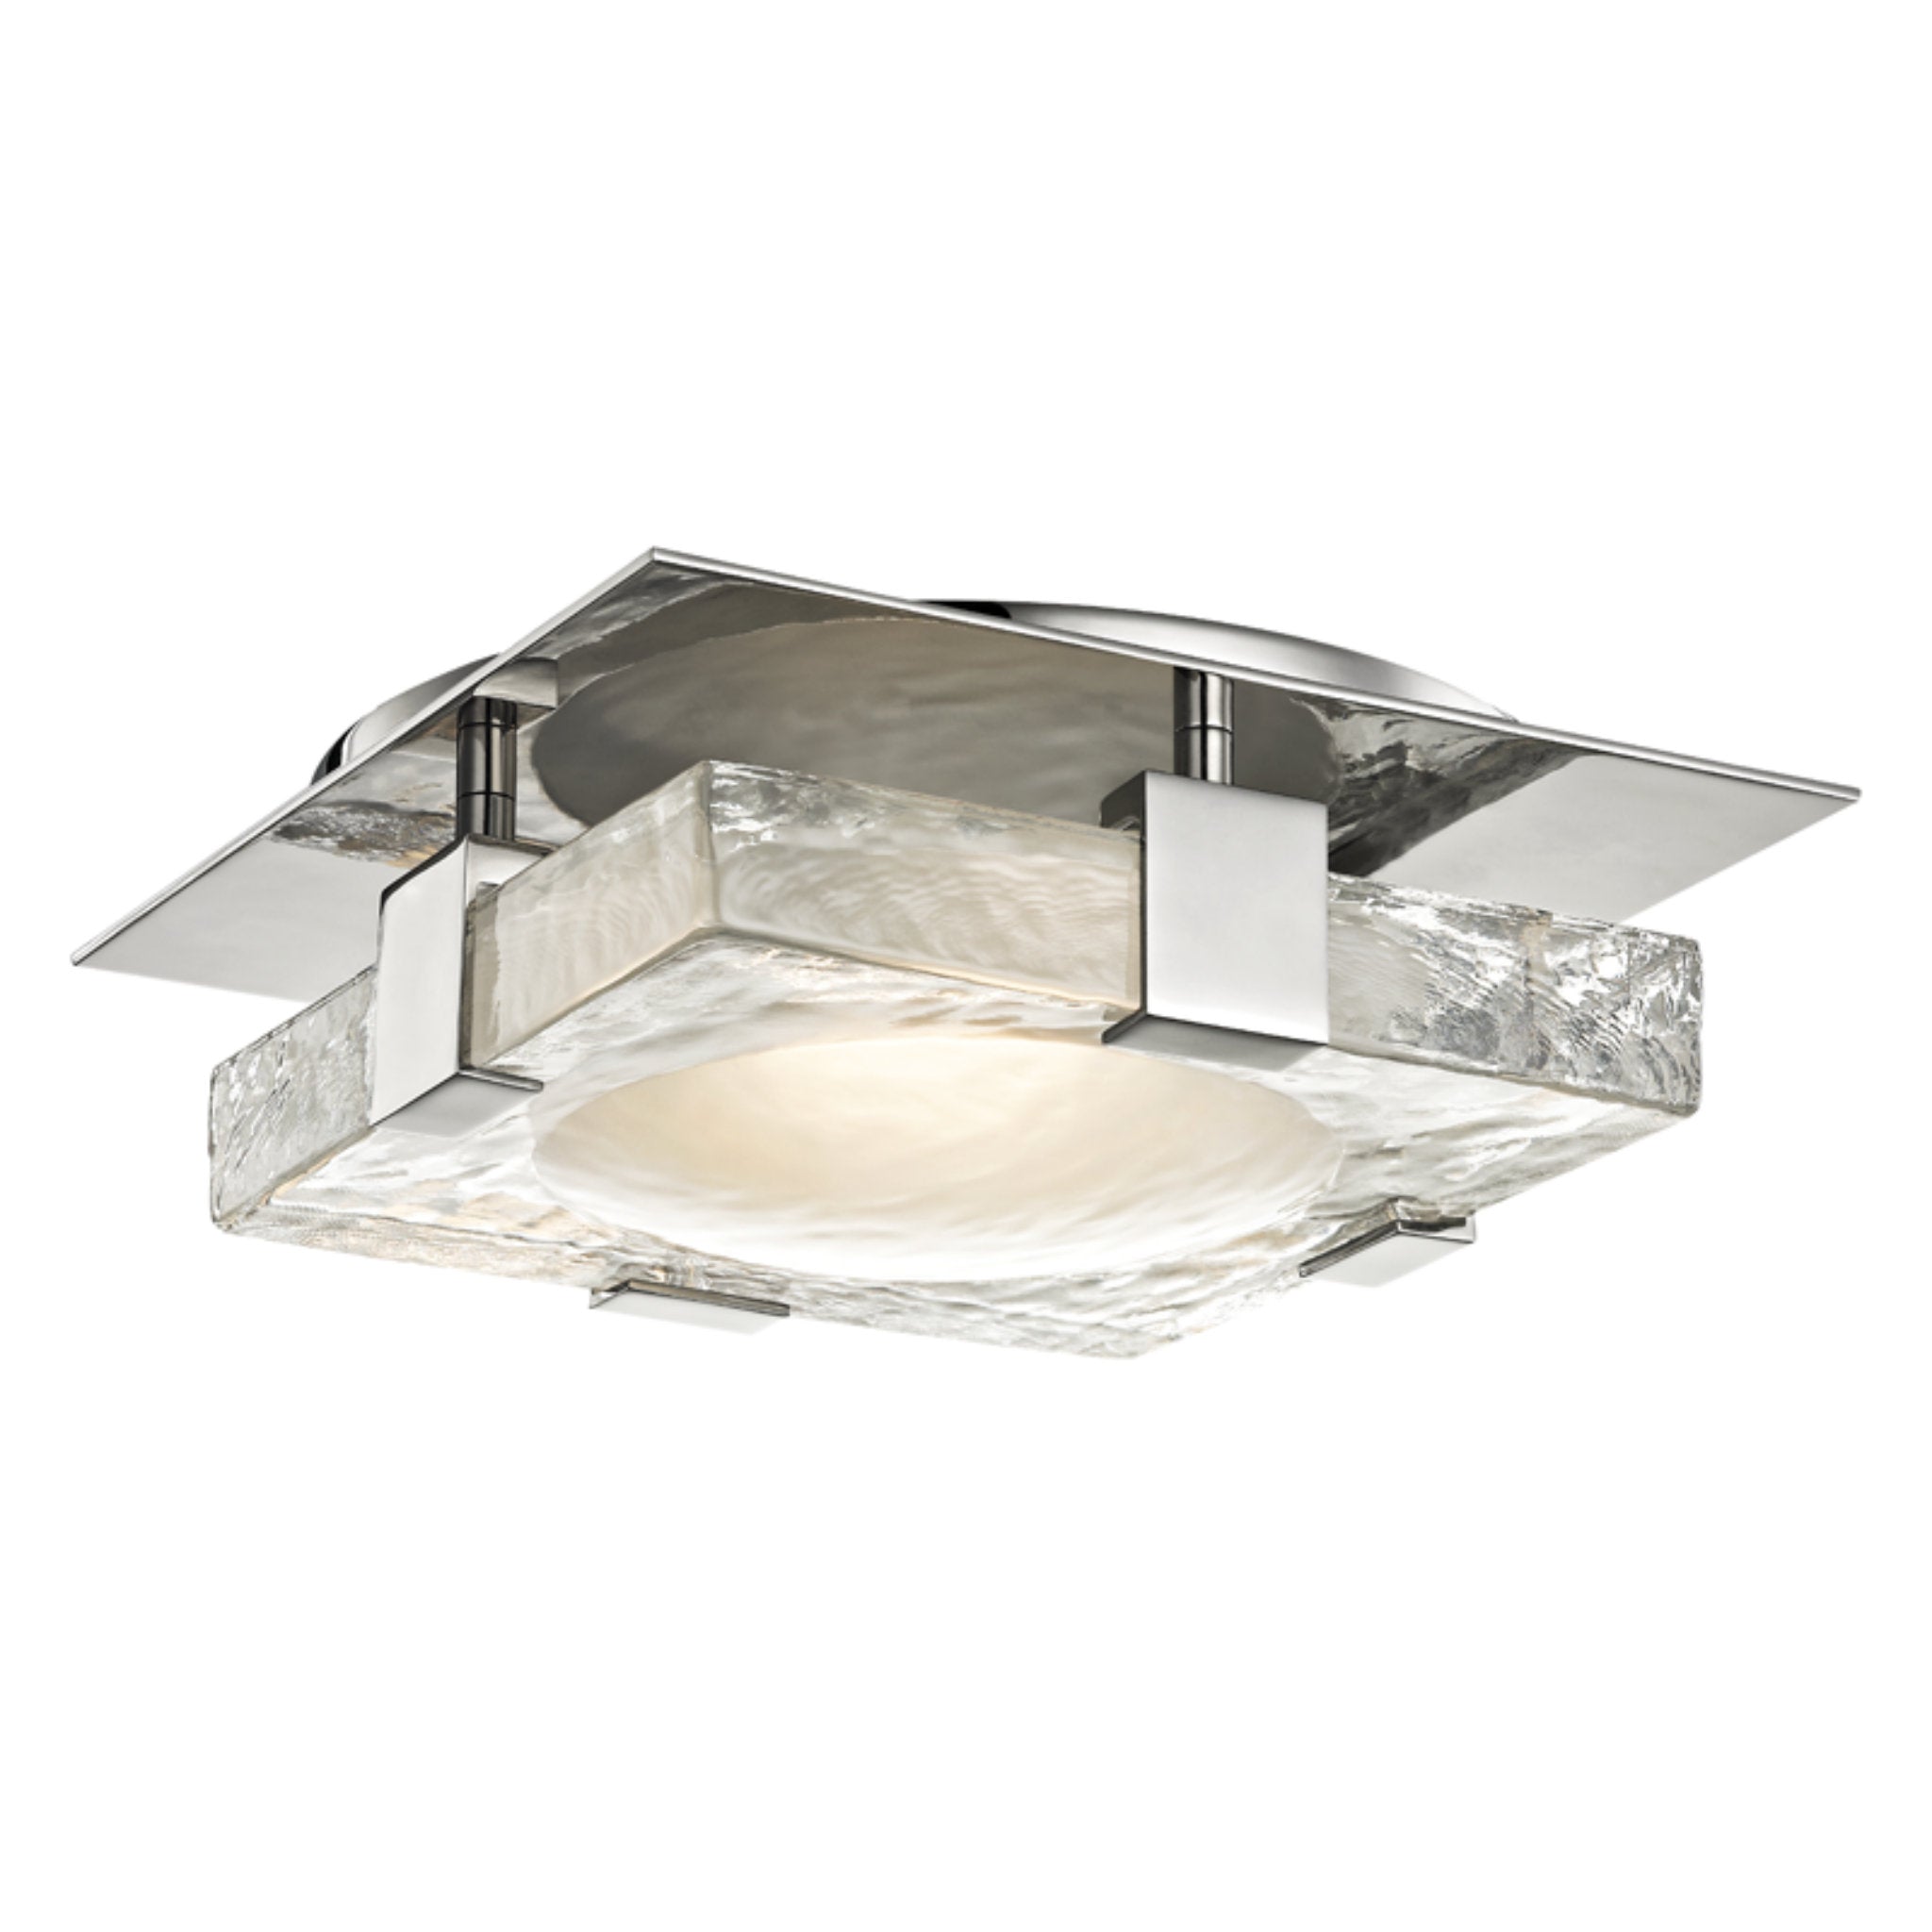 Bourne 1 Light Wall Sconce in Polished Nickel